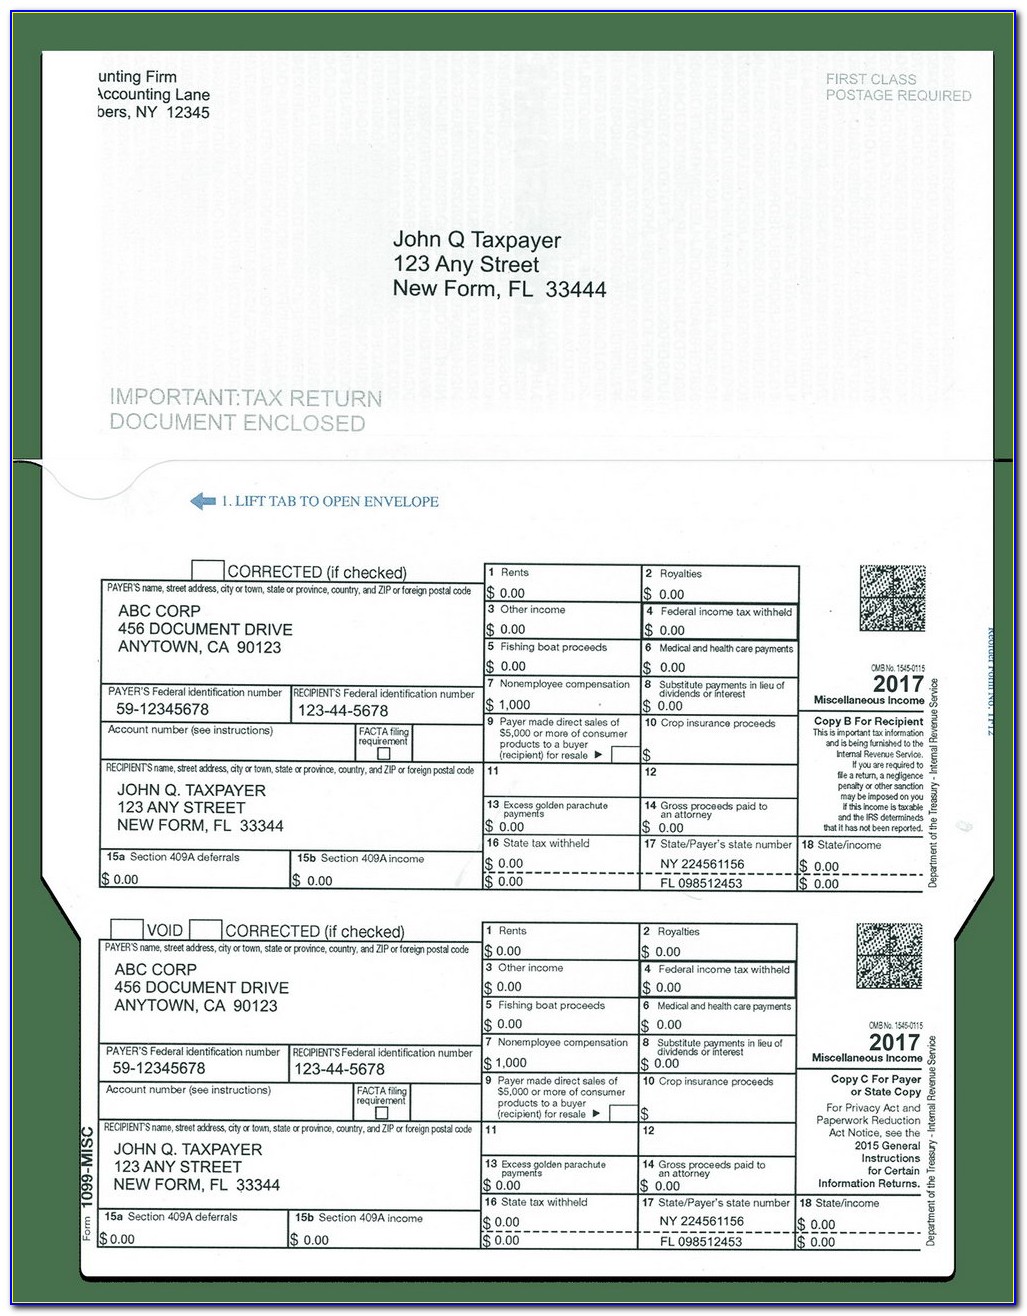 Form 1099 Misc Miscellaneous Income Download